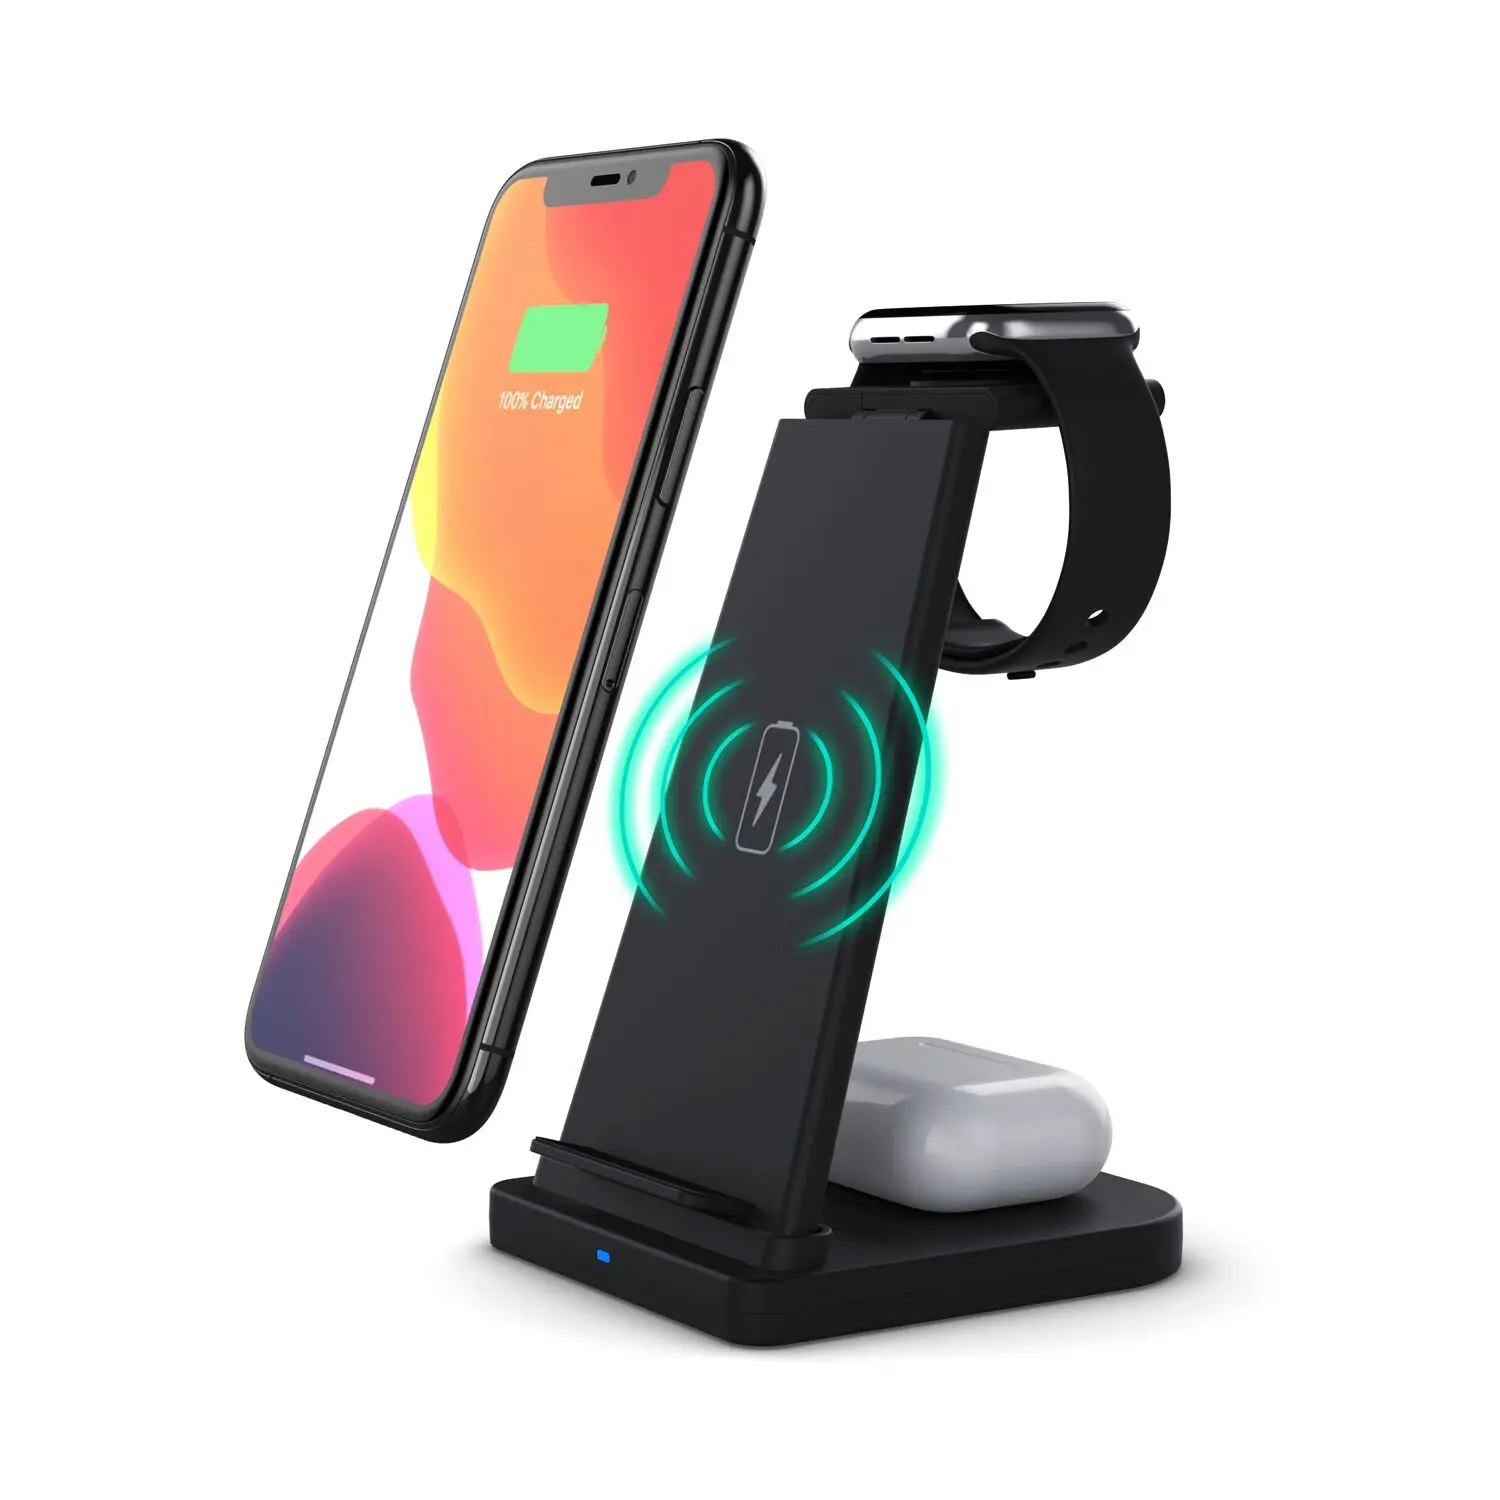 

2021 foldable 3 in 1 wireless charger magnetic wireless charger for Mobile Phone for Apple Watch for Air Pods, Black, white